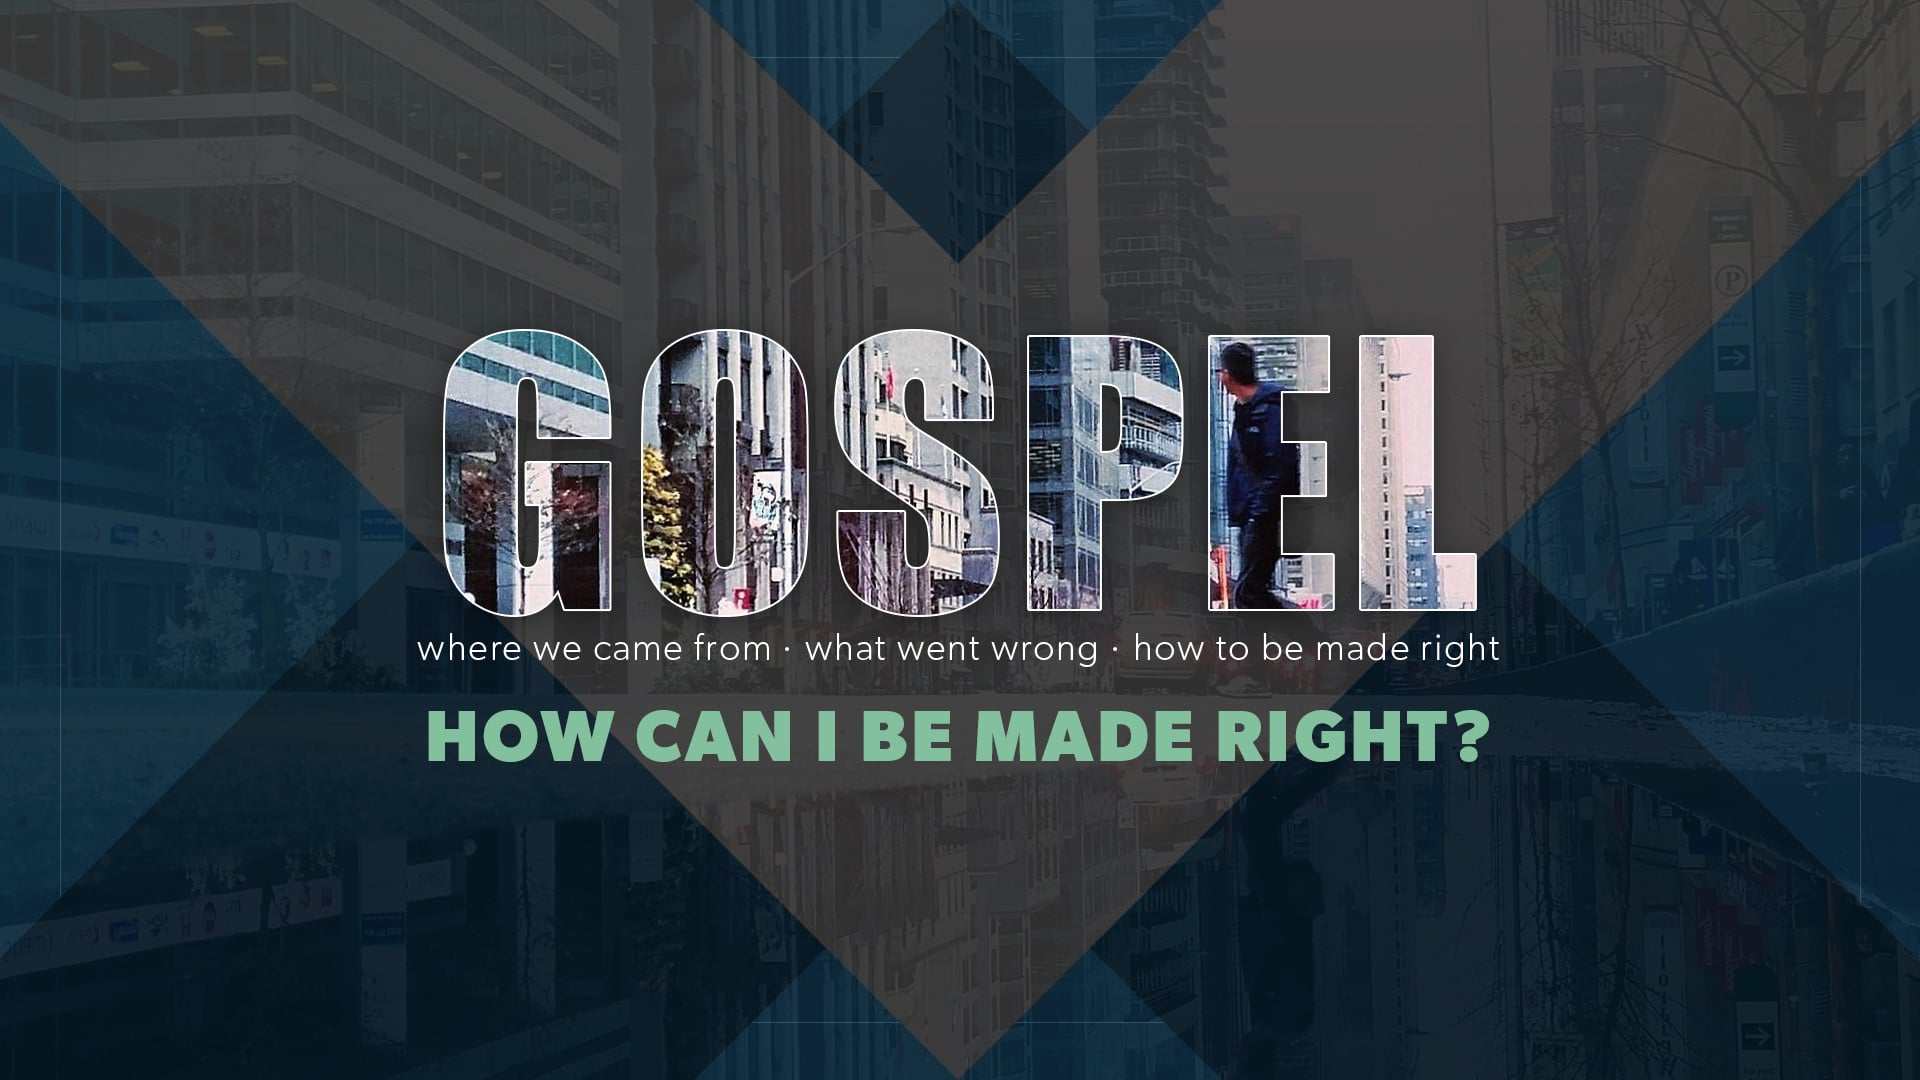 GOSPEL - "How can I be made right?" - Sermon Bumper